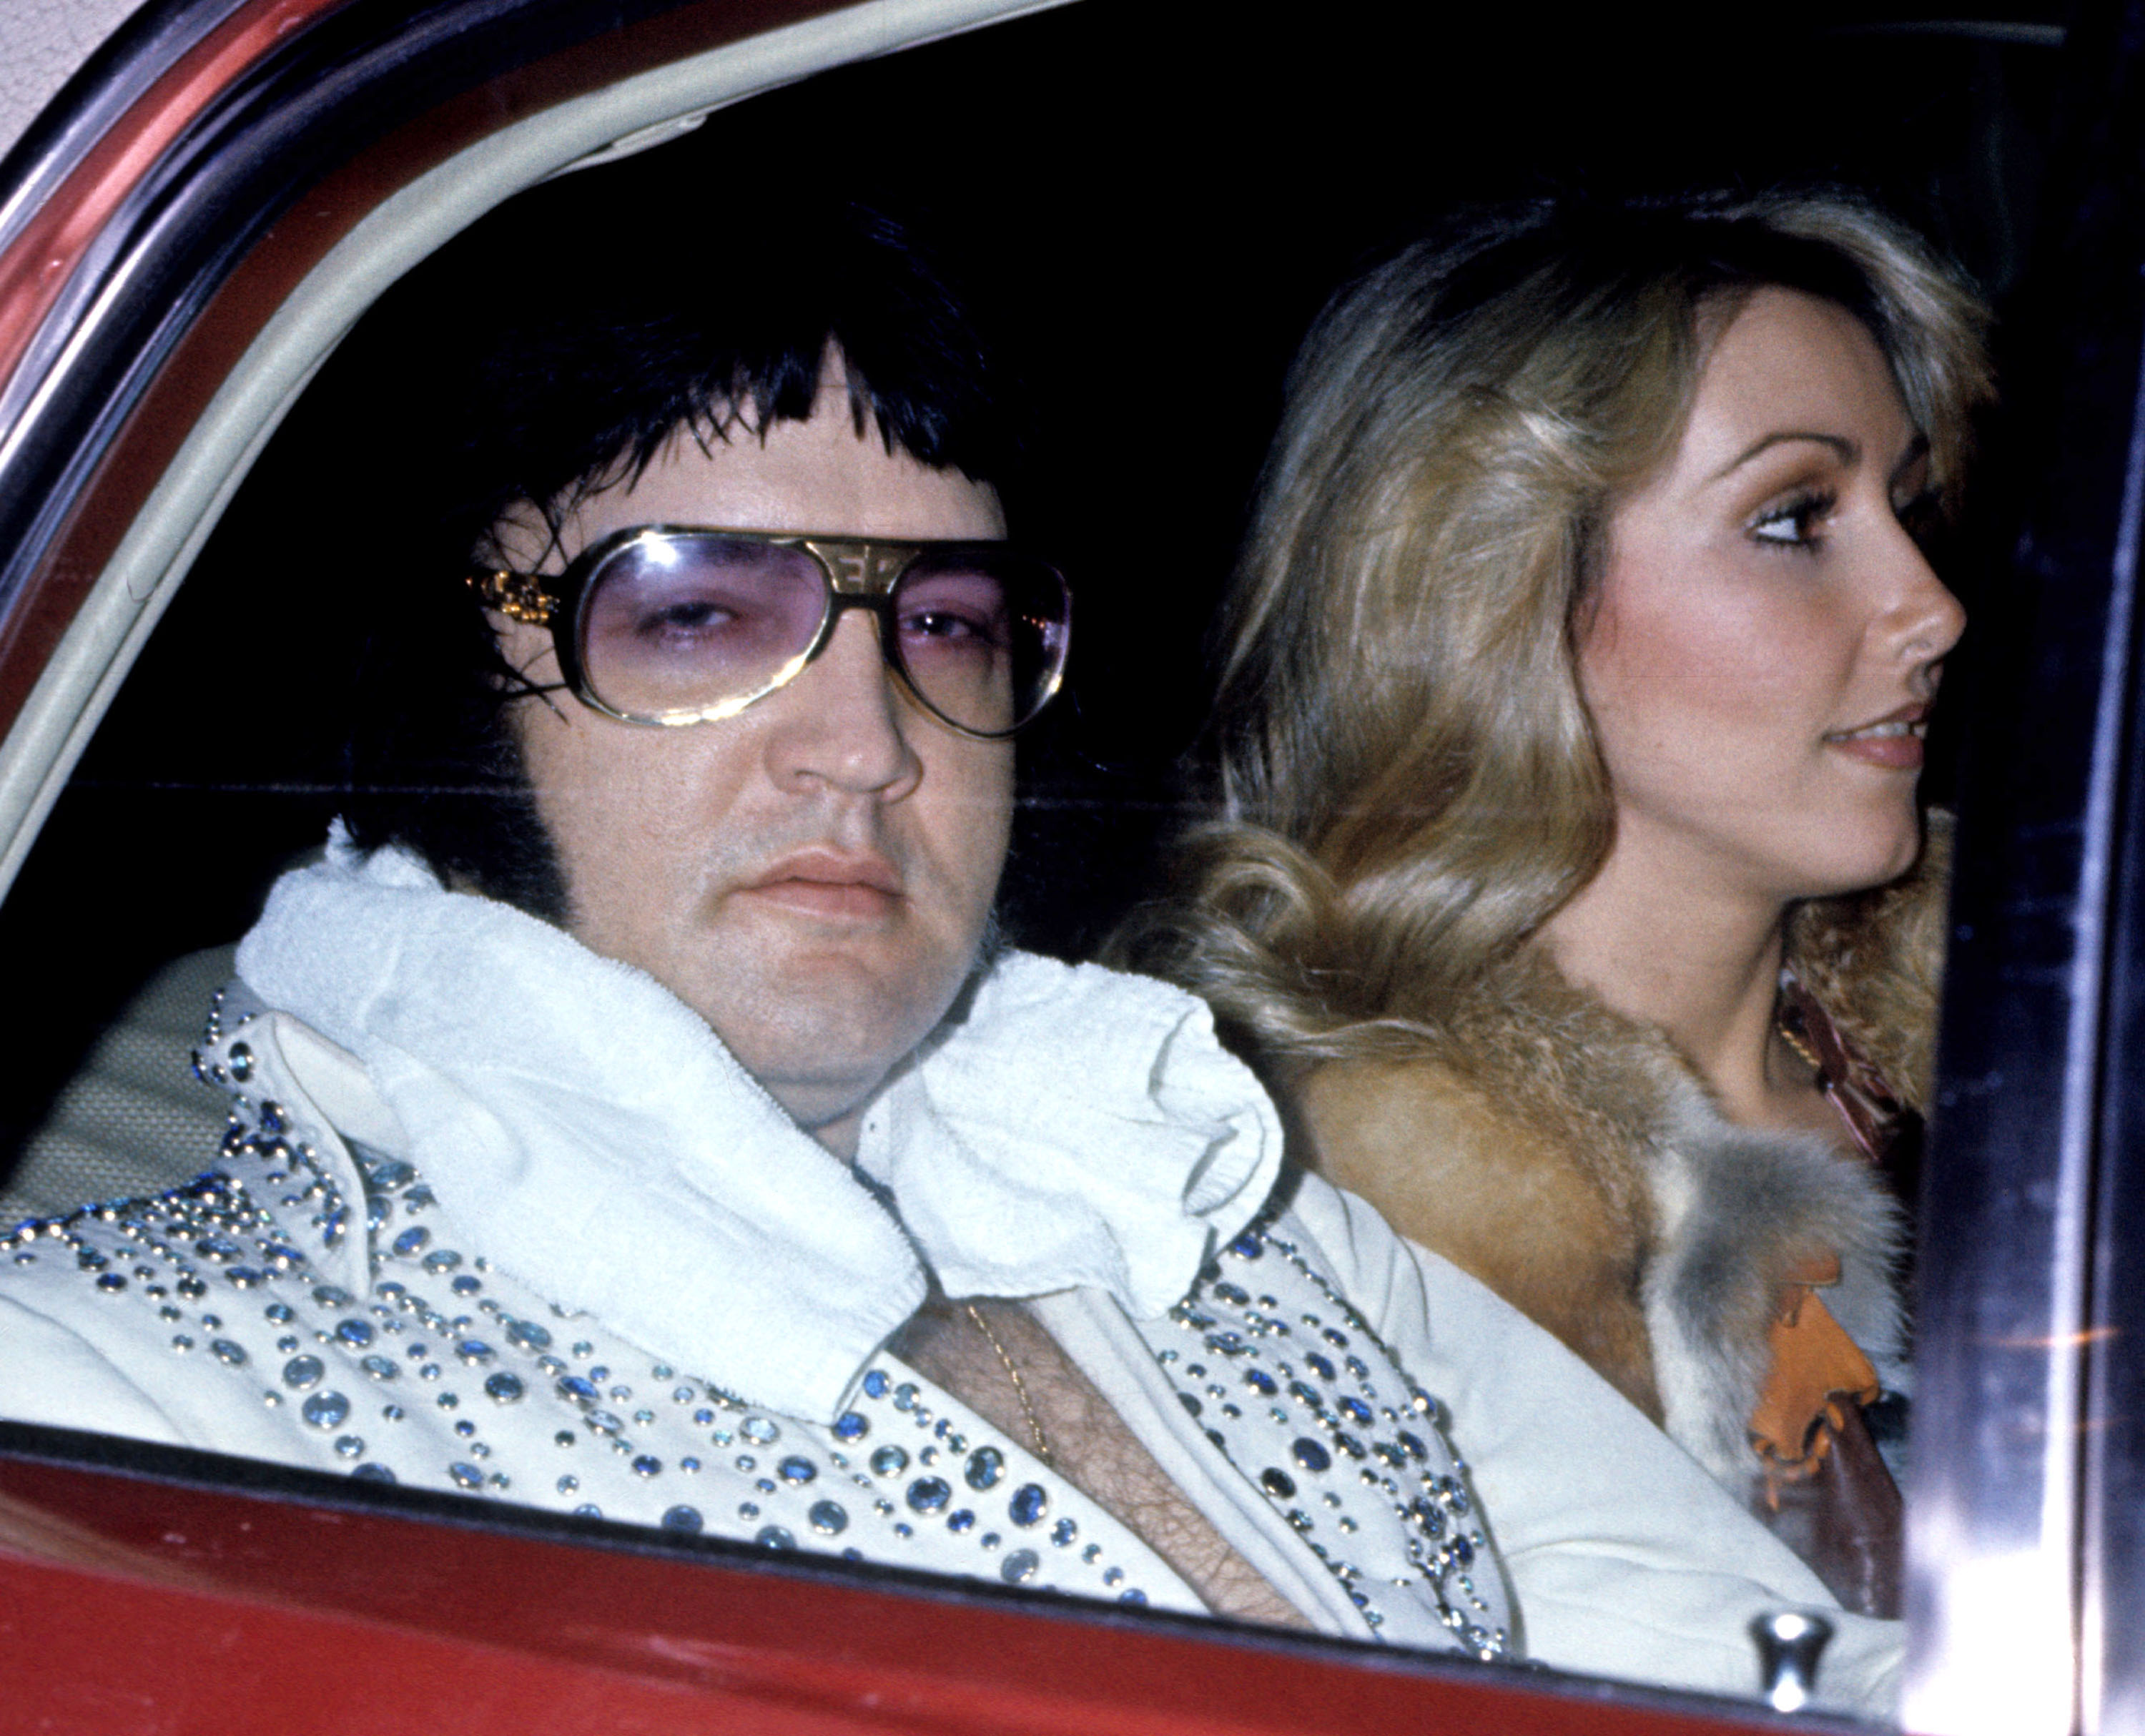 Elvis Presley and Linda Thompson in a vehicle outside Hilton Hotel